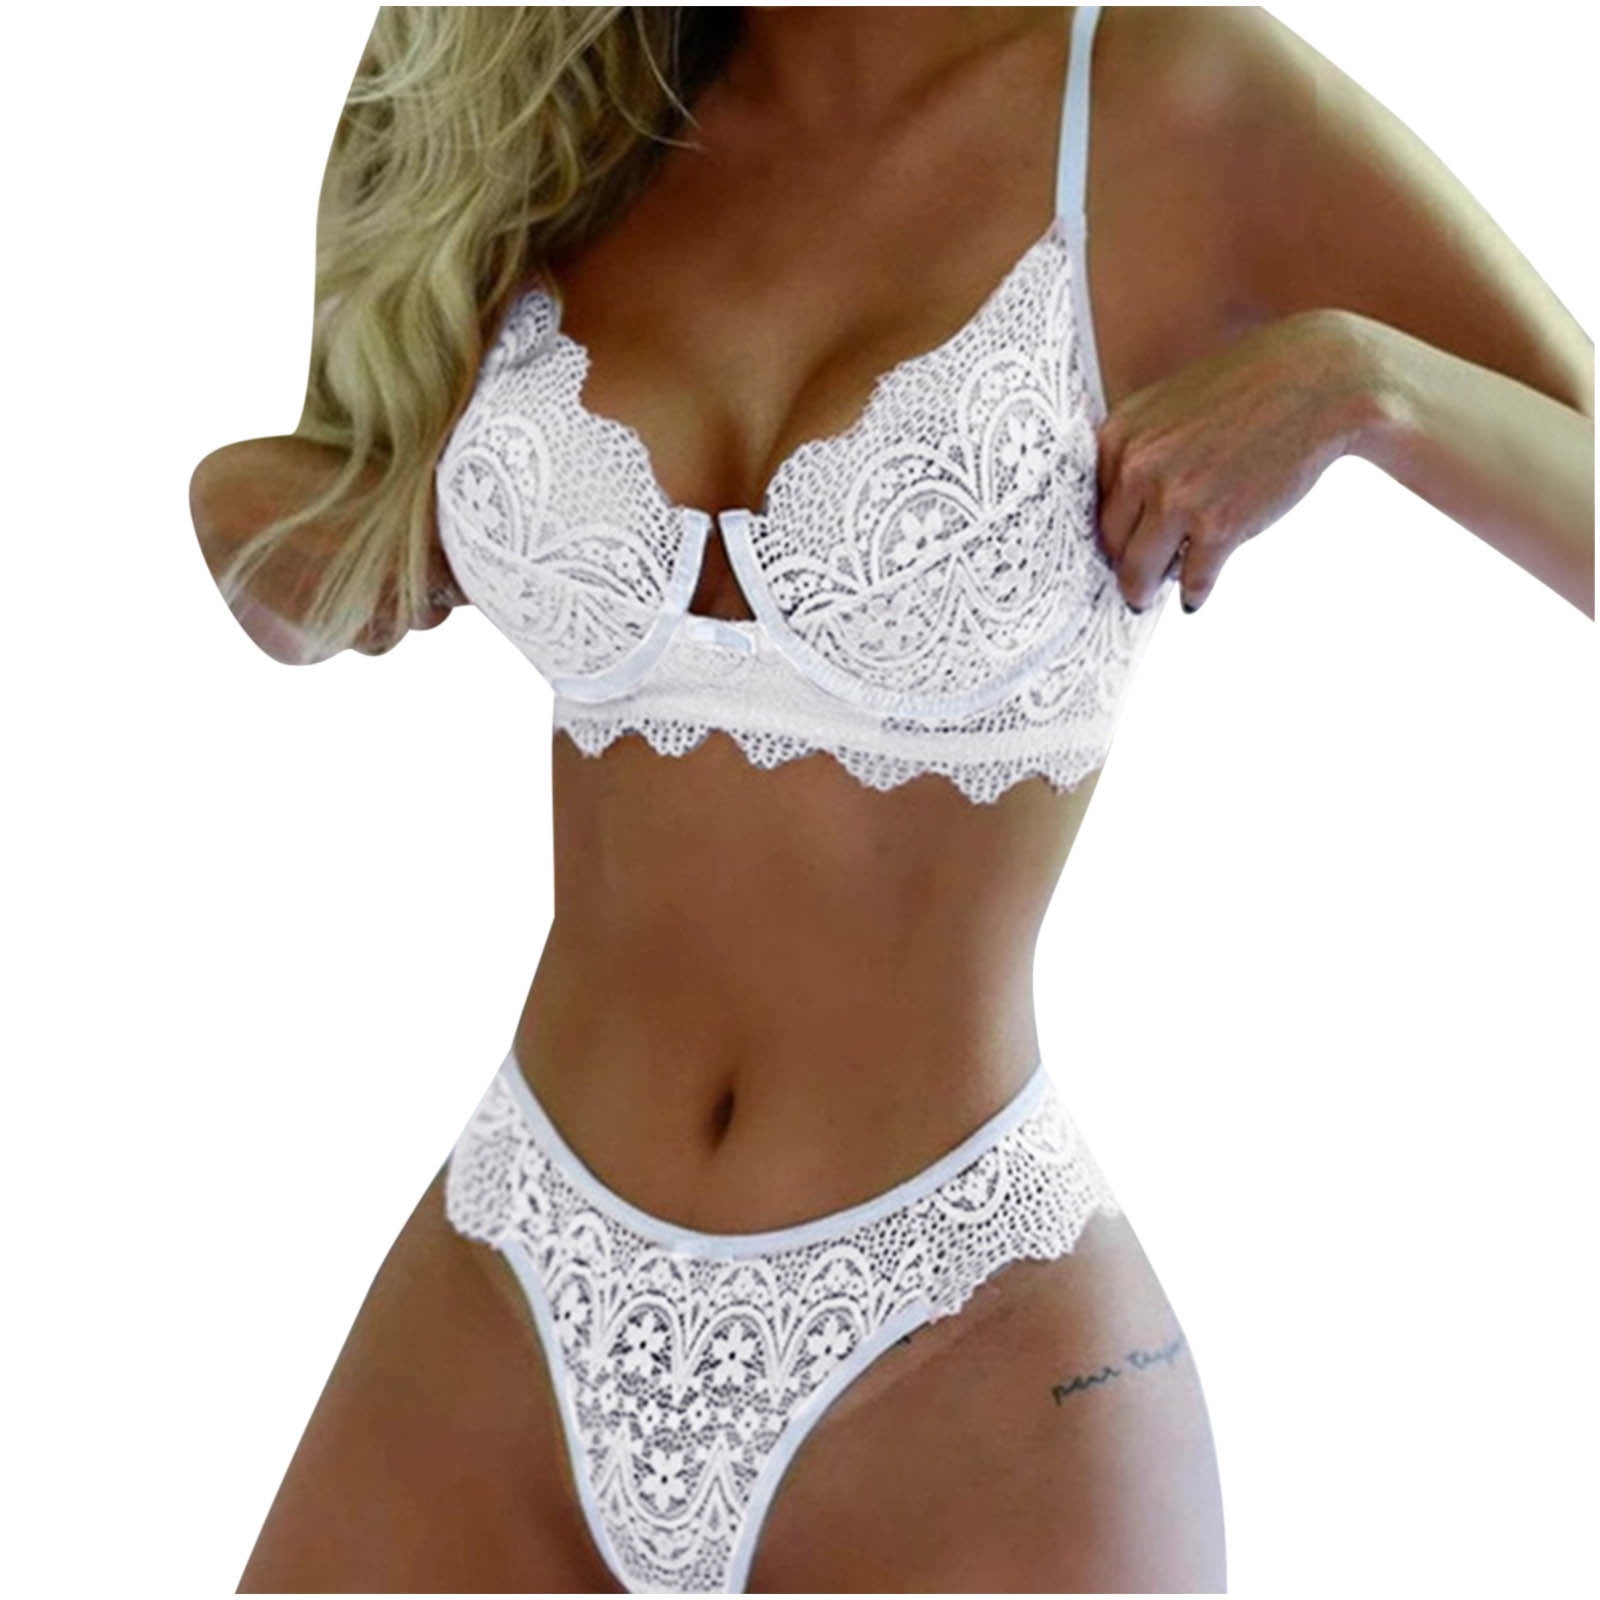 Deals of the Day,Tarmeek Womens Sexy Lingerie Womens Lace Sexy Three-point Gathered Lace Female Sexy Lingerie Suit Teddy Babydoll Bodysuit Sexy Lingerie for Women Naughty for Sex/Play